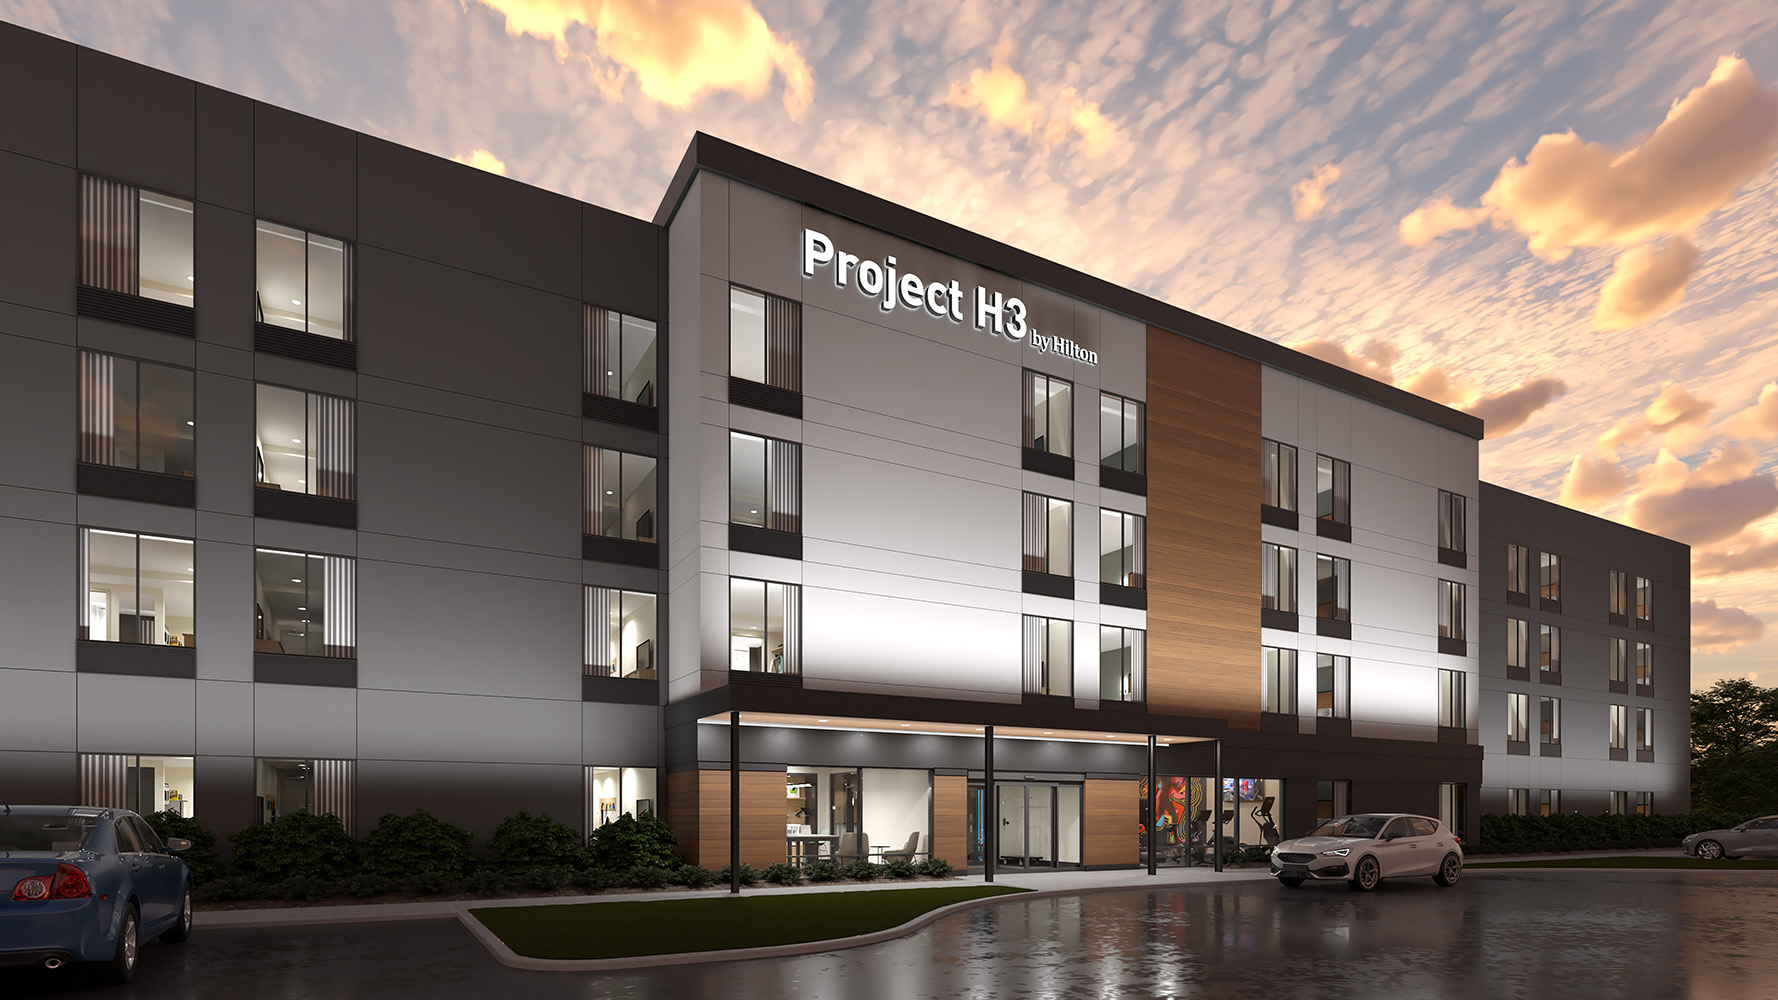 The exterior of Hiltons new extended-stay brand will include warm wood tones and a modern farmhouse-inspired palette